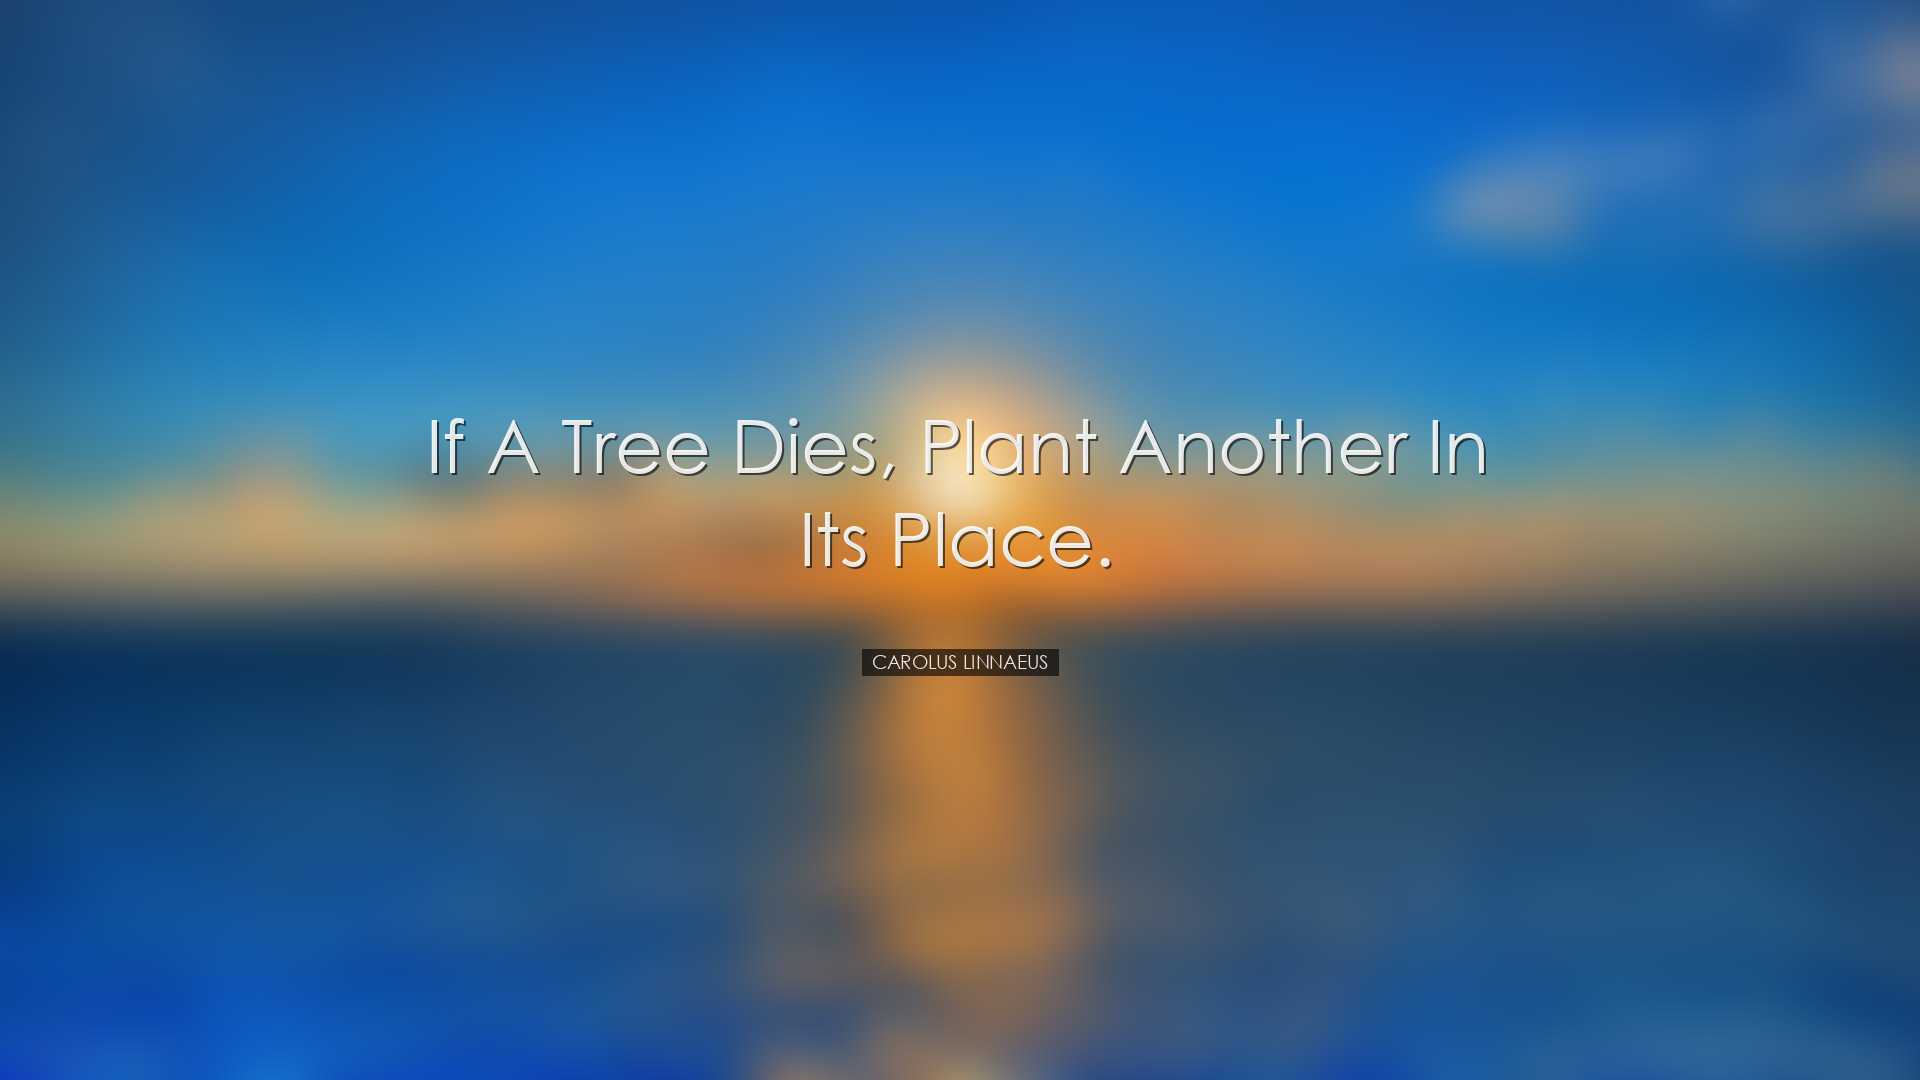 If a tree dies, plant another in its place. - Carolus Linnaeus